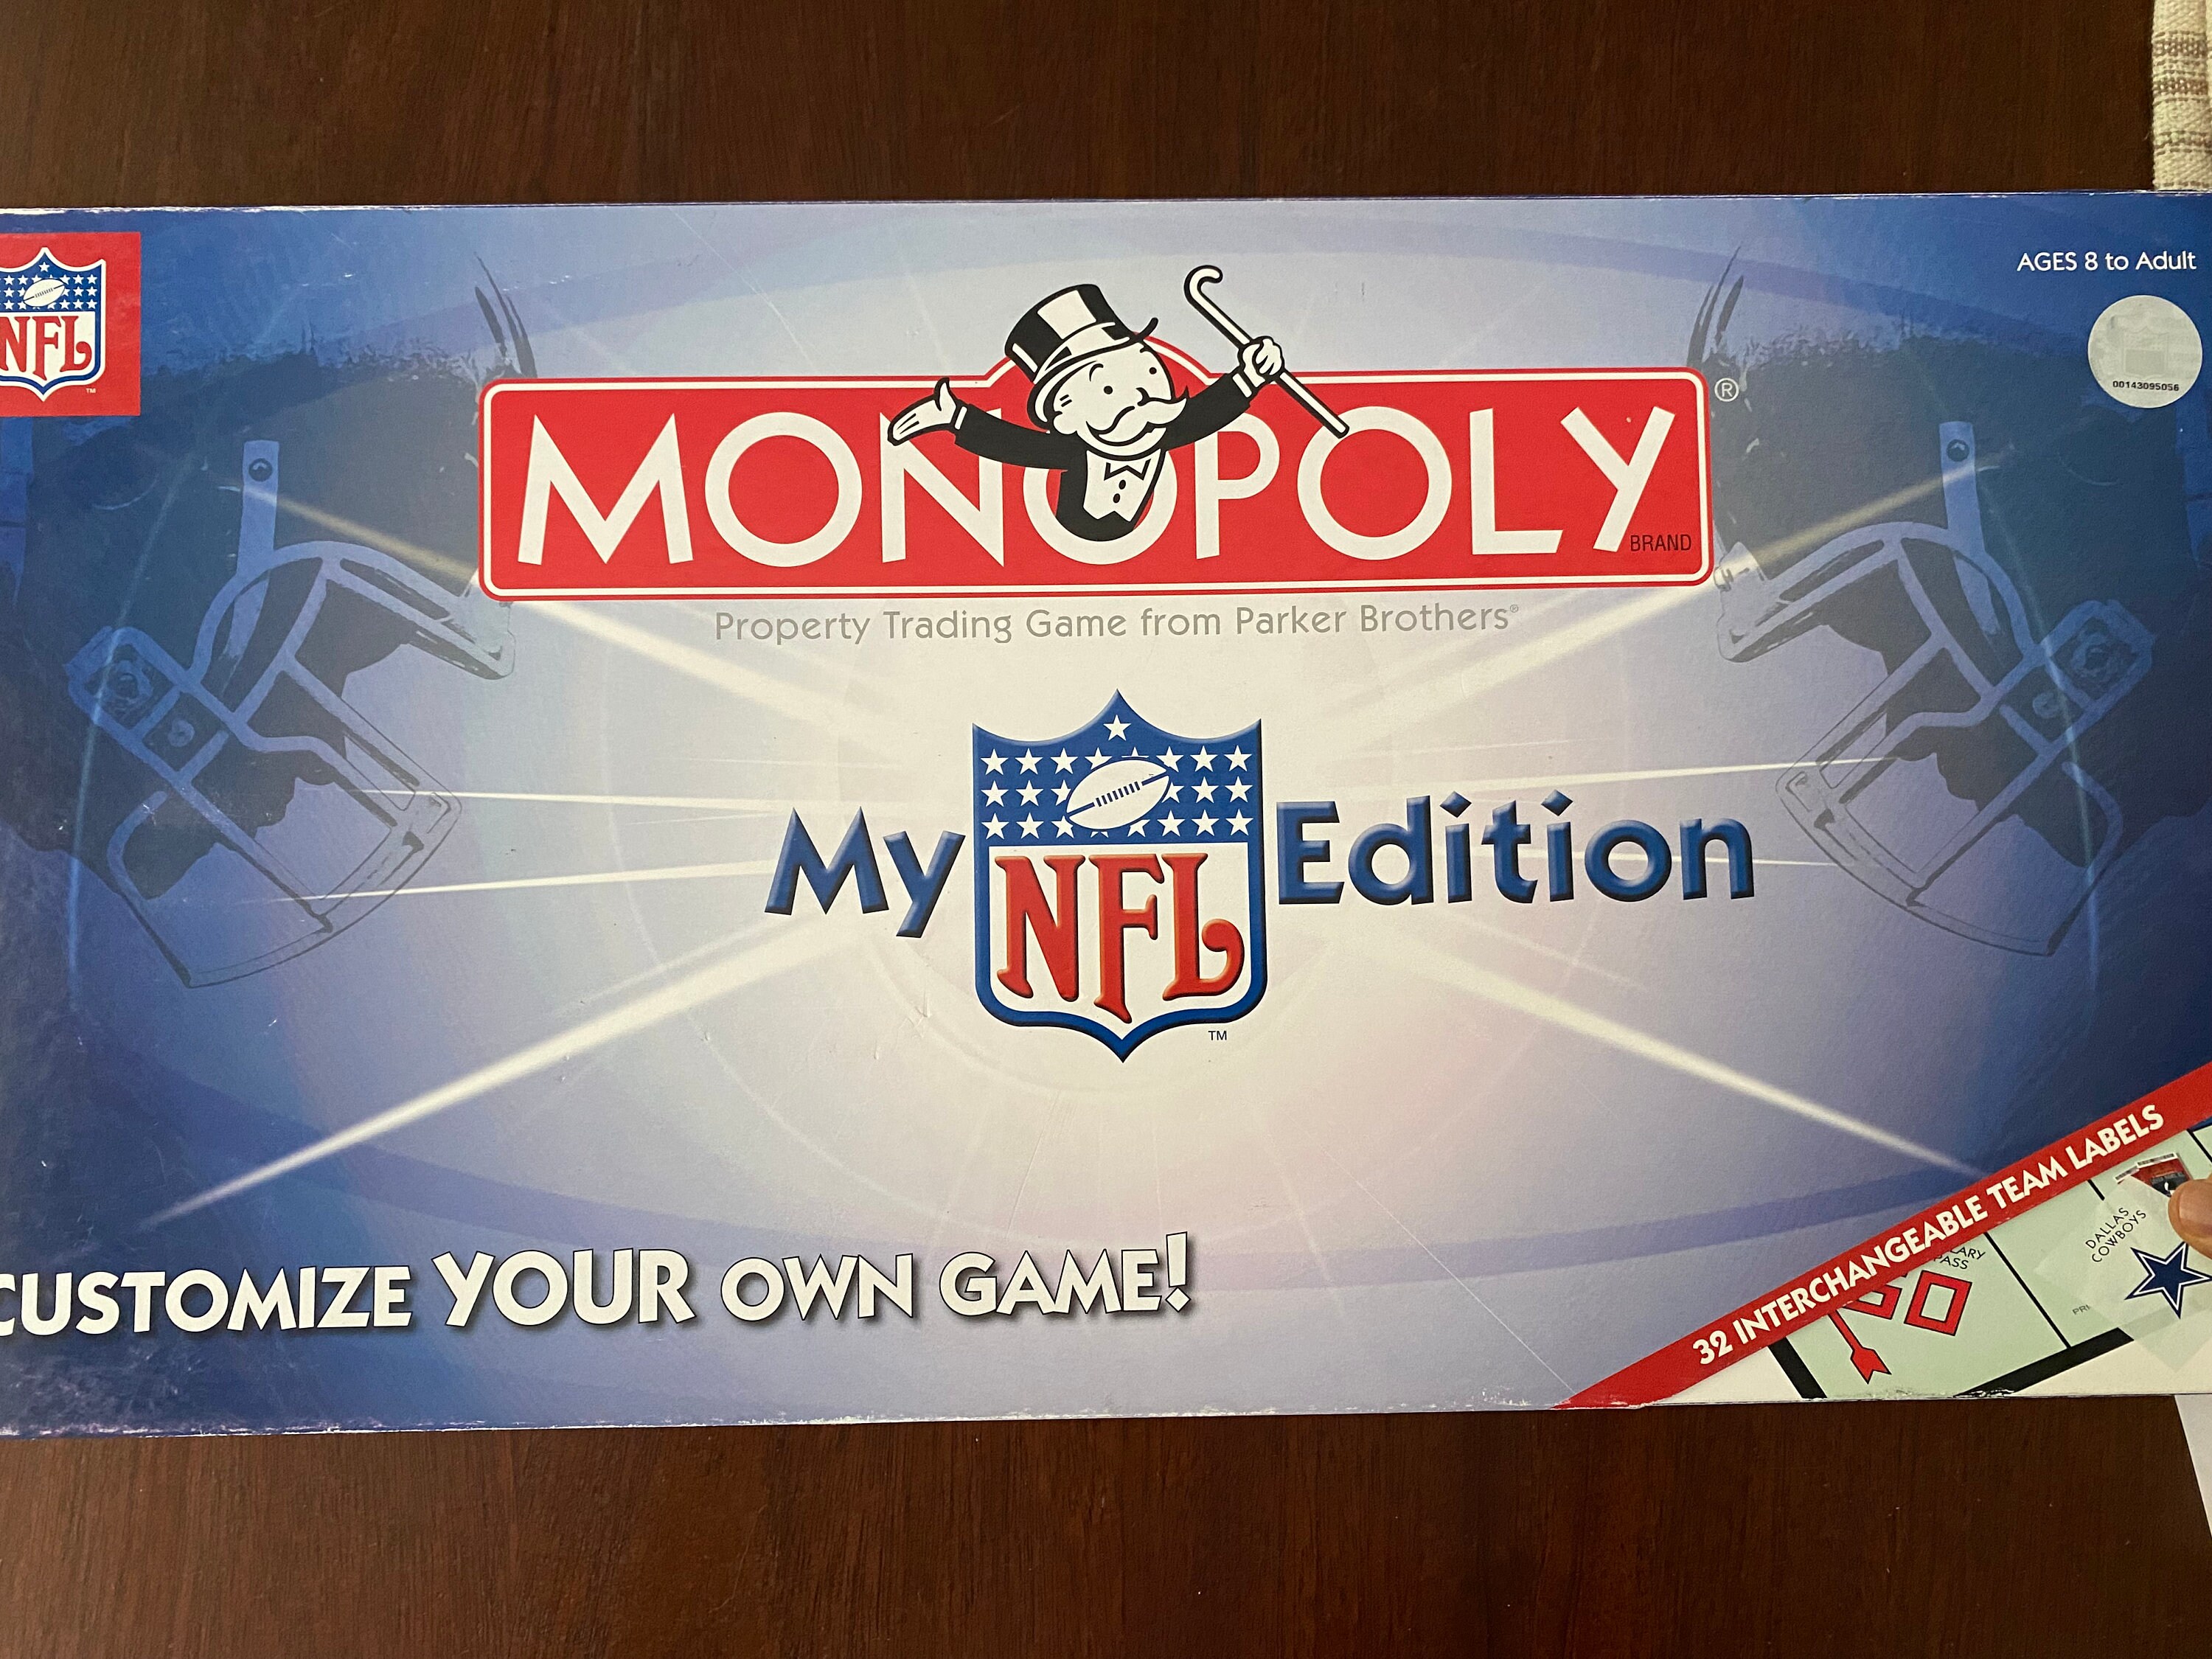 Edition　Football　NFL　Canada　Monopoly　National　League　Etsy　Monopoly　NFL